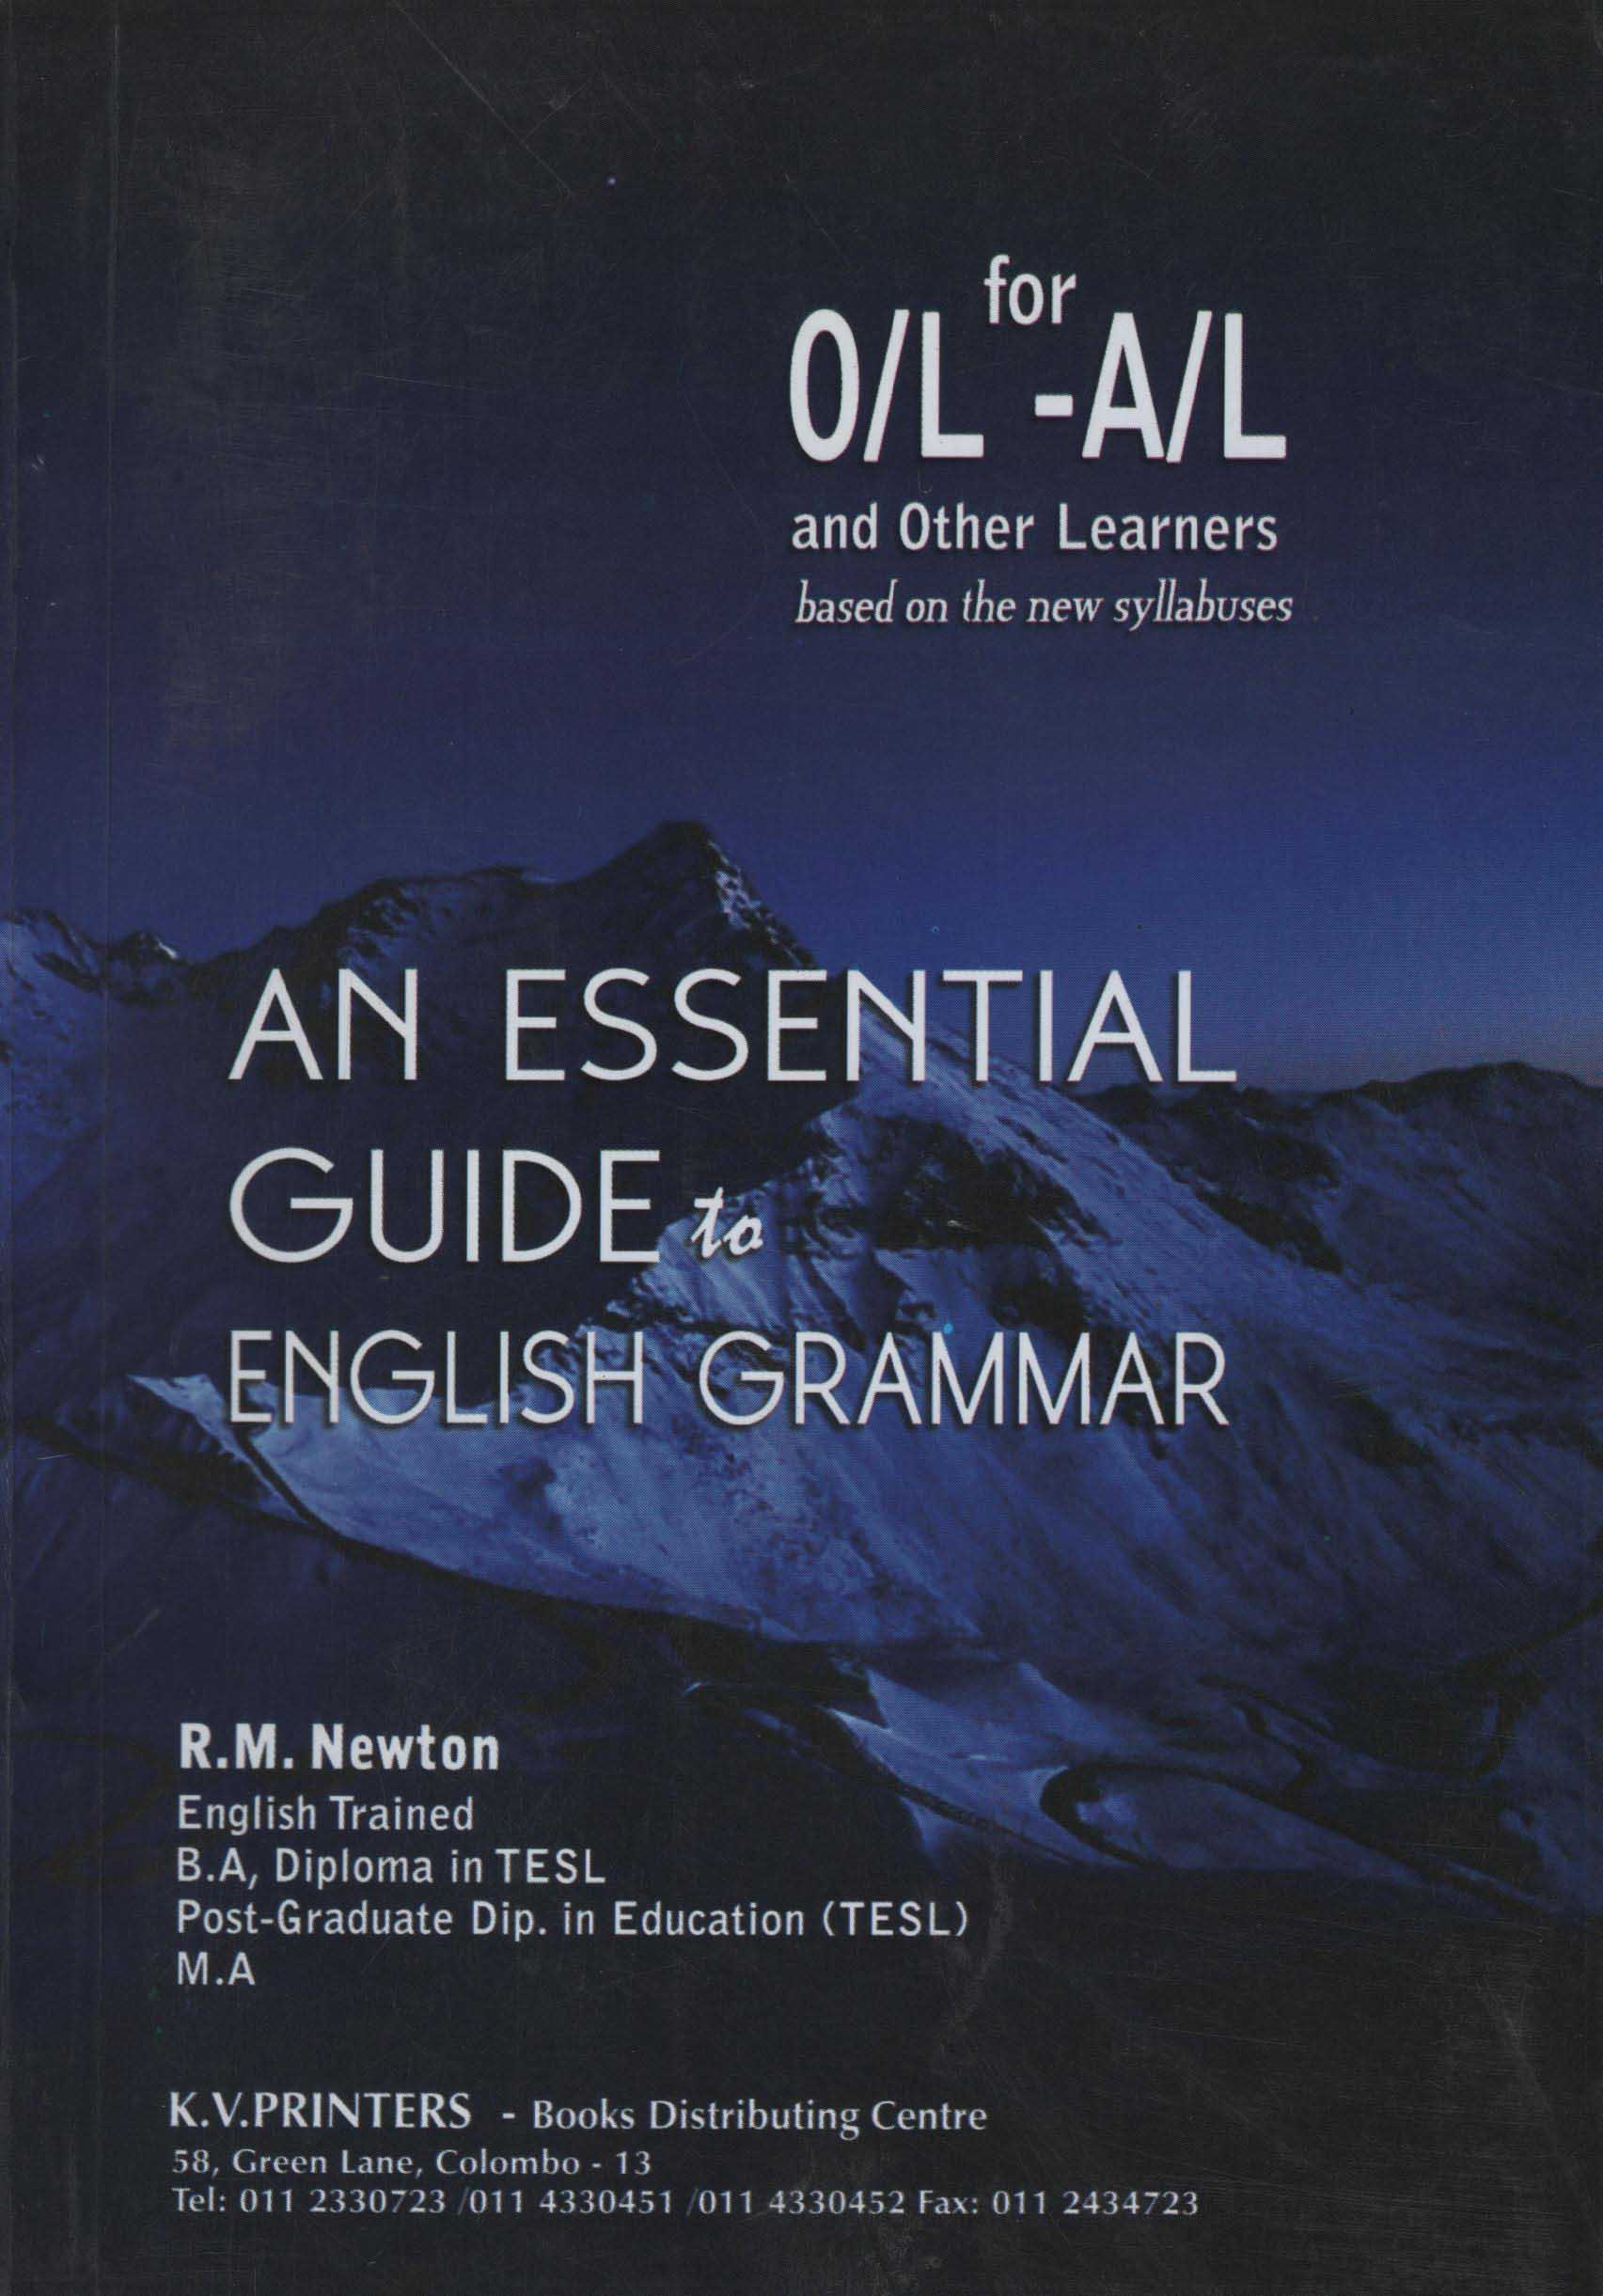 AN Essential Guide to English Grammar for O/L - A/L